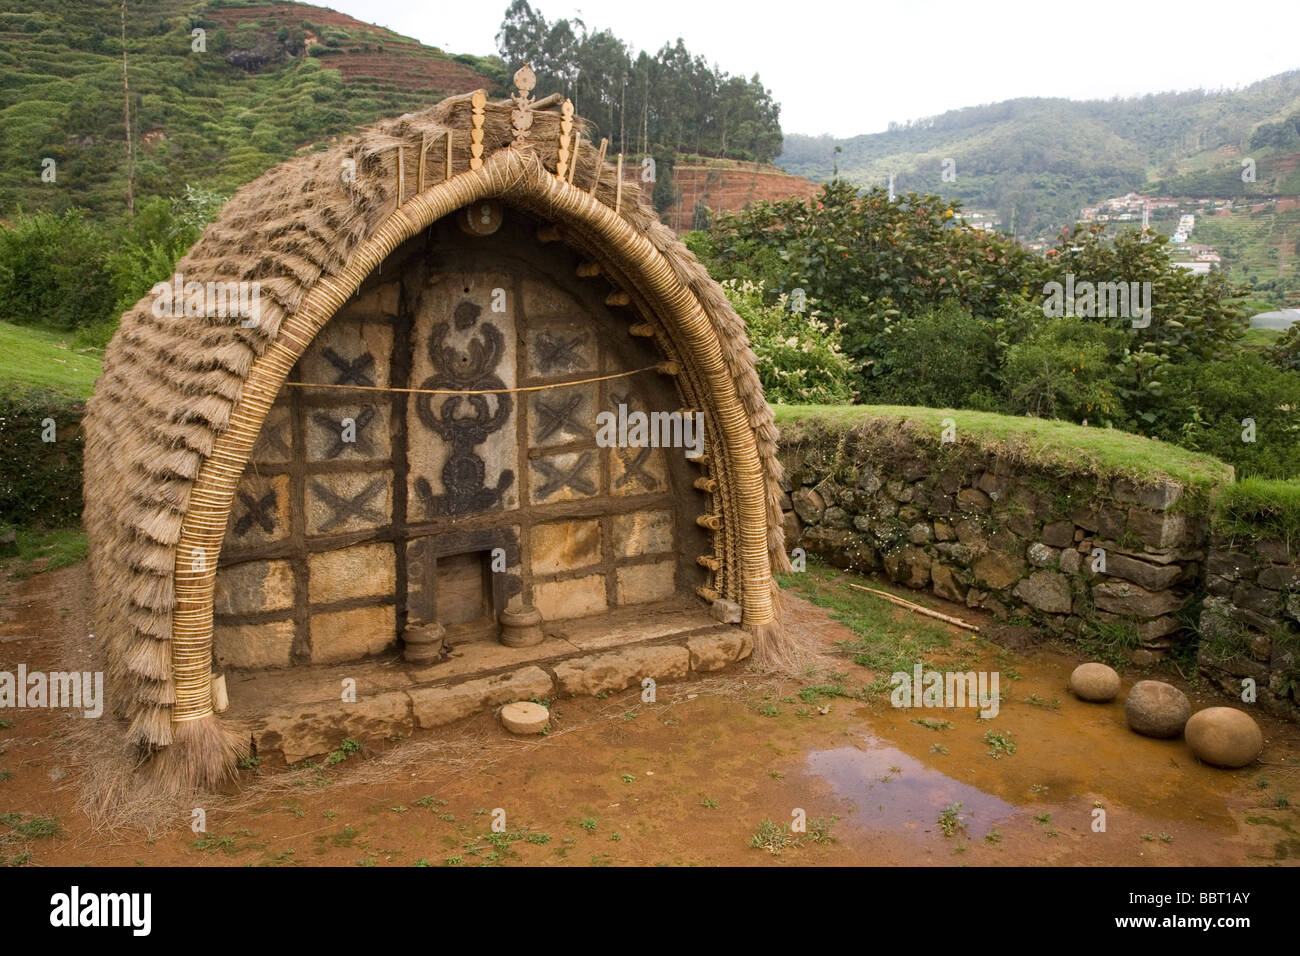 The temple in a Toda tribal mund (settlement). The mund is within the Botanical Garden at the Indian hillstation of Ooty. Stock Photo